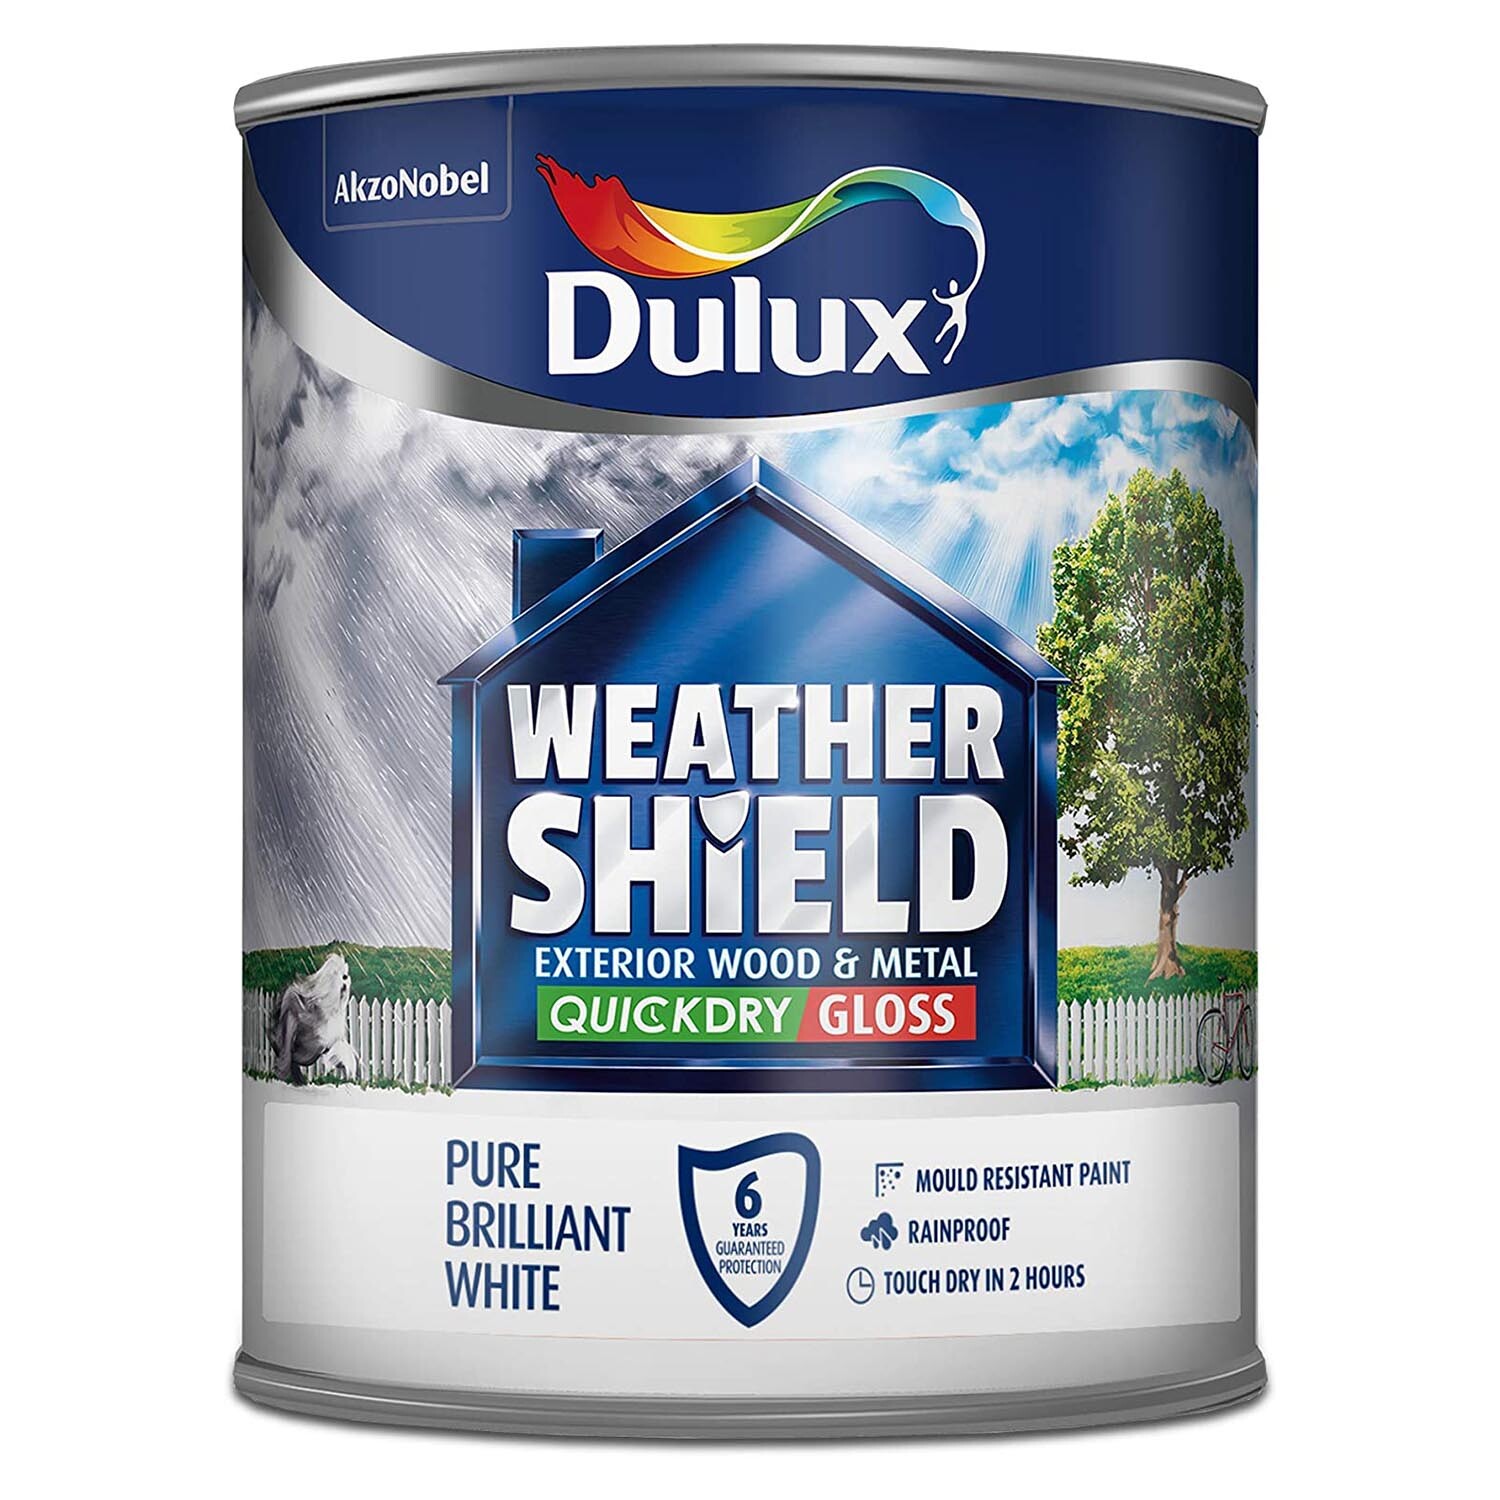 Dulux Weathershield Wood and Metal White Gloss Quick Dry Paint 750ml Image 2